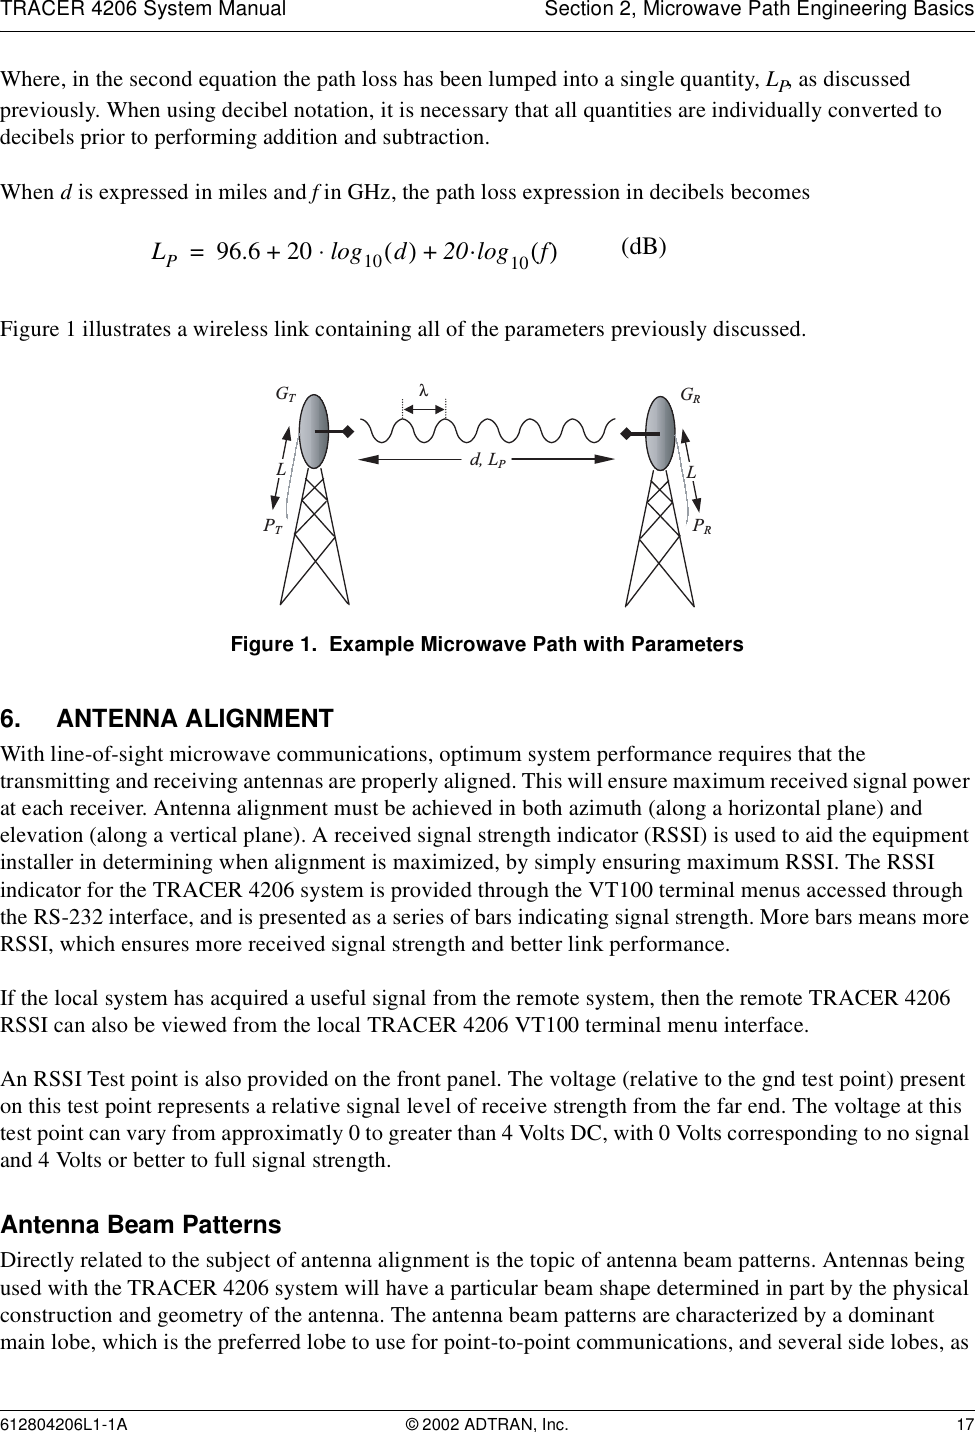 TRACER 4206 System Manual Section 2, Microwave Path Engineering Basics612804206L1-1A © 2002 ADTRAN, Inc. 17Where, in the second equation the path loss has been lumped into a single quantity, LP, as discussed previously. When using decibel notation, it is necessary that all quantities are individually converted to decibels prior to performing addition and subtraction.When d is expressed in miles and f in GHz, the path loss expression in decibels becomesFigure 1 illustrates a wireless link containing all of the parameters previously discussed.Figure 1.  Example Microwave Path with Parameters6. ANTENNA ALIGNMENTWith line-of-sight microwave communications, optimum system performance requires that the transmitting and receiving antennas are properly aligned. This will ensure maximum received signal power at each receiver. Antenna alignment must be achieved in both azimuth (along a horizontal plane) and elevation (along a vertical plane). A received signal strength indicator (RSSI) is used to aid the equipment installer in determining when alignment is maximized, by simply ensuring maximum RSSI. The RSSI indicator for the TRACER 4206 system is provided through the VT100 terminal menus accessed through the RS-232 interface, and is presented as a series of bars indicating signal strength. More bars means more RSSI, which ensures more received signal strength and better link performance.If the local system has acquired a useful signal from the remote system, then the remote TRACER 4206 RSSI can also be viewed from the local TRACER 4206 VT100 terminal menu interface.An RSSI Test point is also provided on the front panel. The voltage (relative to the gnd test point) present on this test point represents a relative signal level of receive strength from the far end. The voltage at this test point can vary from approximatly 0 to greater than 4 Volts DC, with 0 Volts corresponding to no signal and 4 Volts or better to full signal strength.Antenna Beam PatternsDirectly related to the subject of antenna alignment is the topic of antenna beam patterns. Antennas being used with the TRACER 4206 system will have a particular beam shape determined in part by the physical construction and geometry of the antenna. The antenna beam patterns are characterized by a dominant main lobe, which is the preferred lobe to use for point-to-point communications, and several side lobes, as LP96.6 20 log10 d() 20·log+10 f()⋅+= (dB) GTGRd, LPPTPRλLL